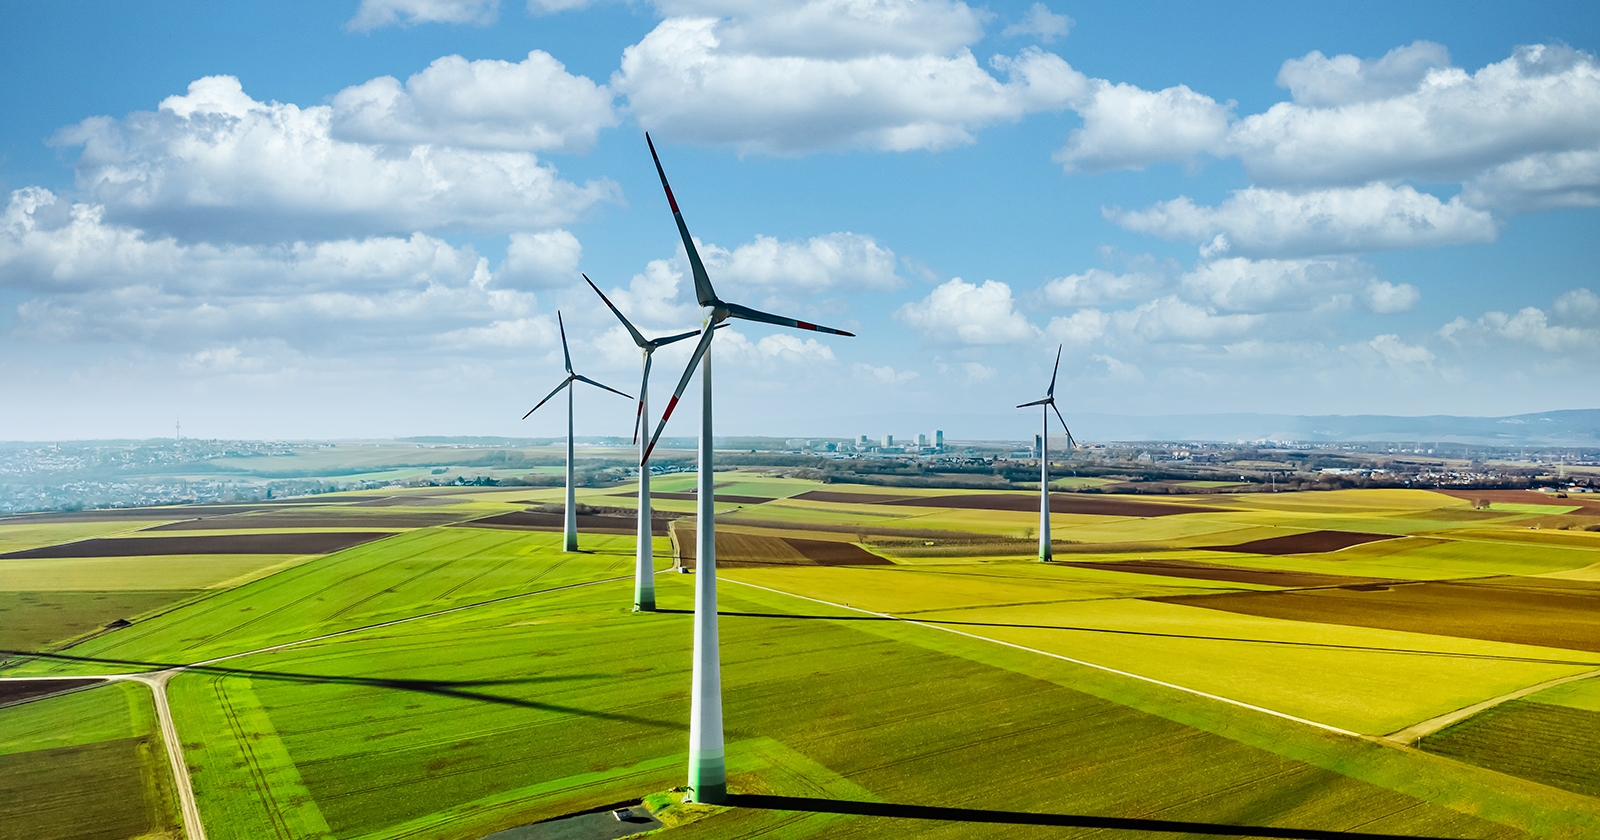 Wind turbines standing in a field of crops on a sunny day. Exponent engineers provide support for all energy systems.